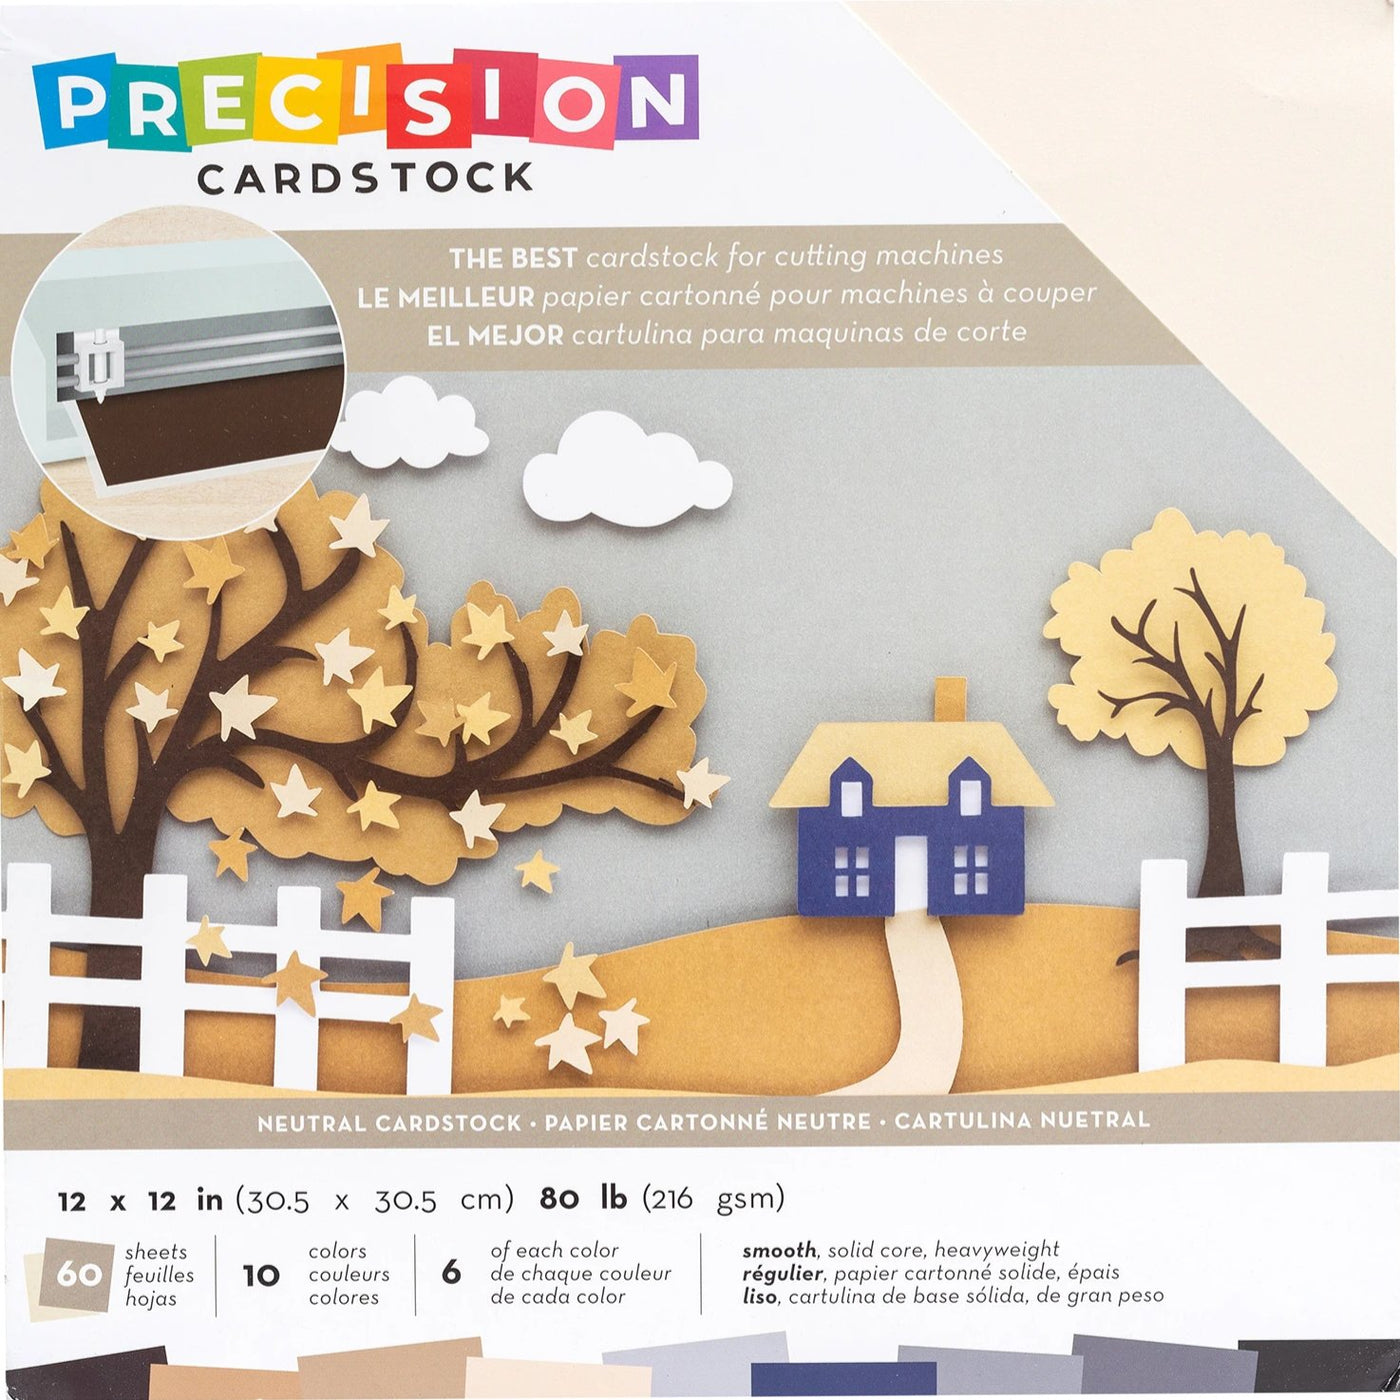 NEUTRAL Precision Cardstock Variety Pack